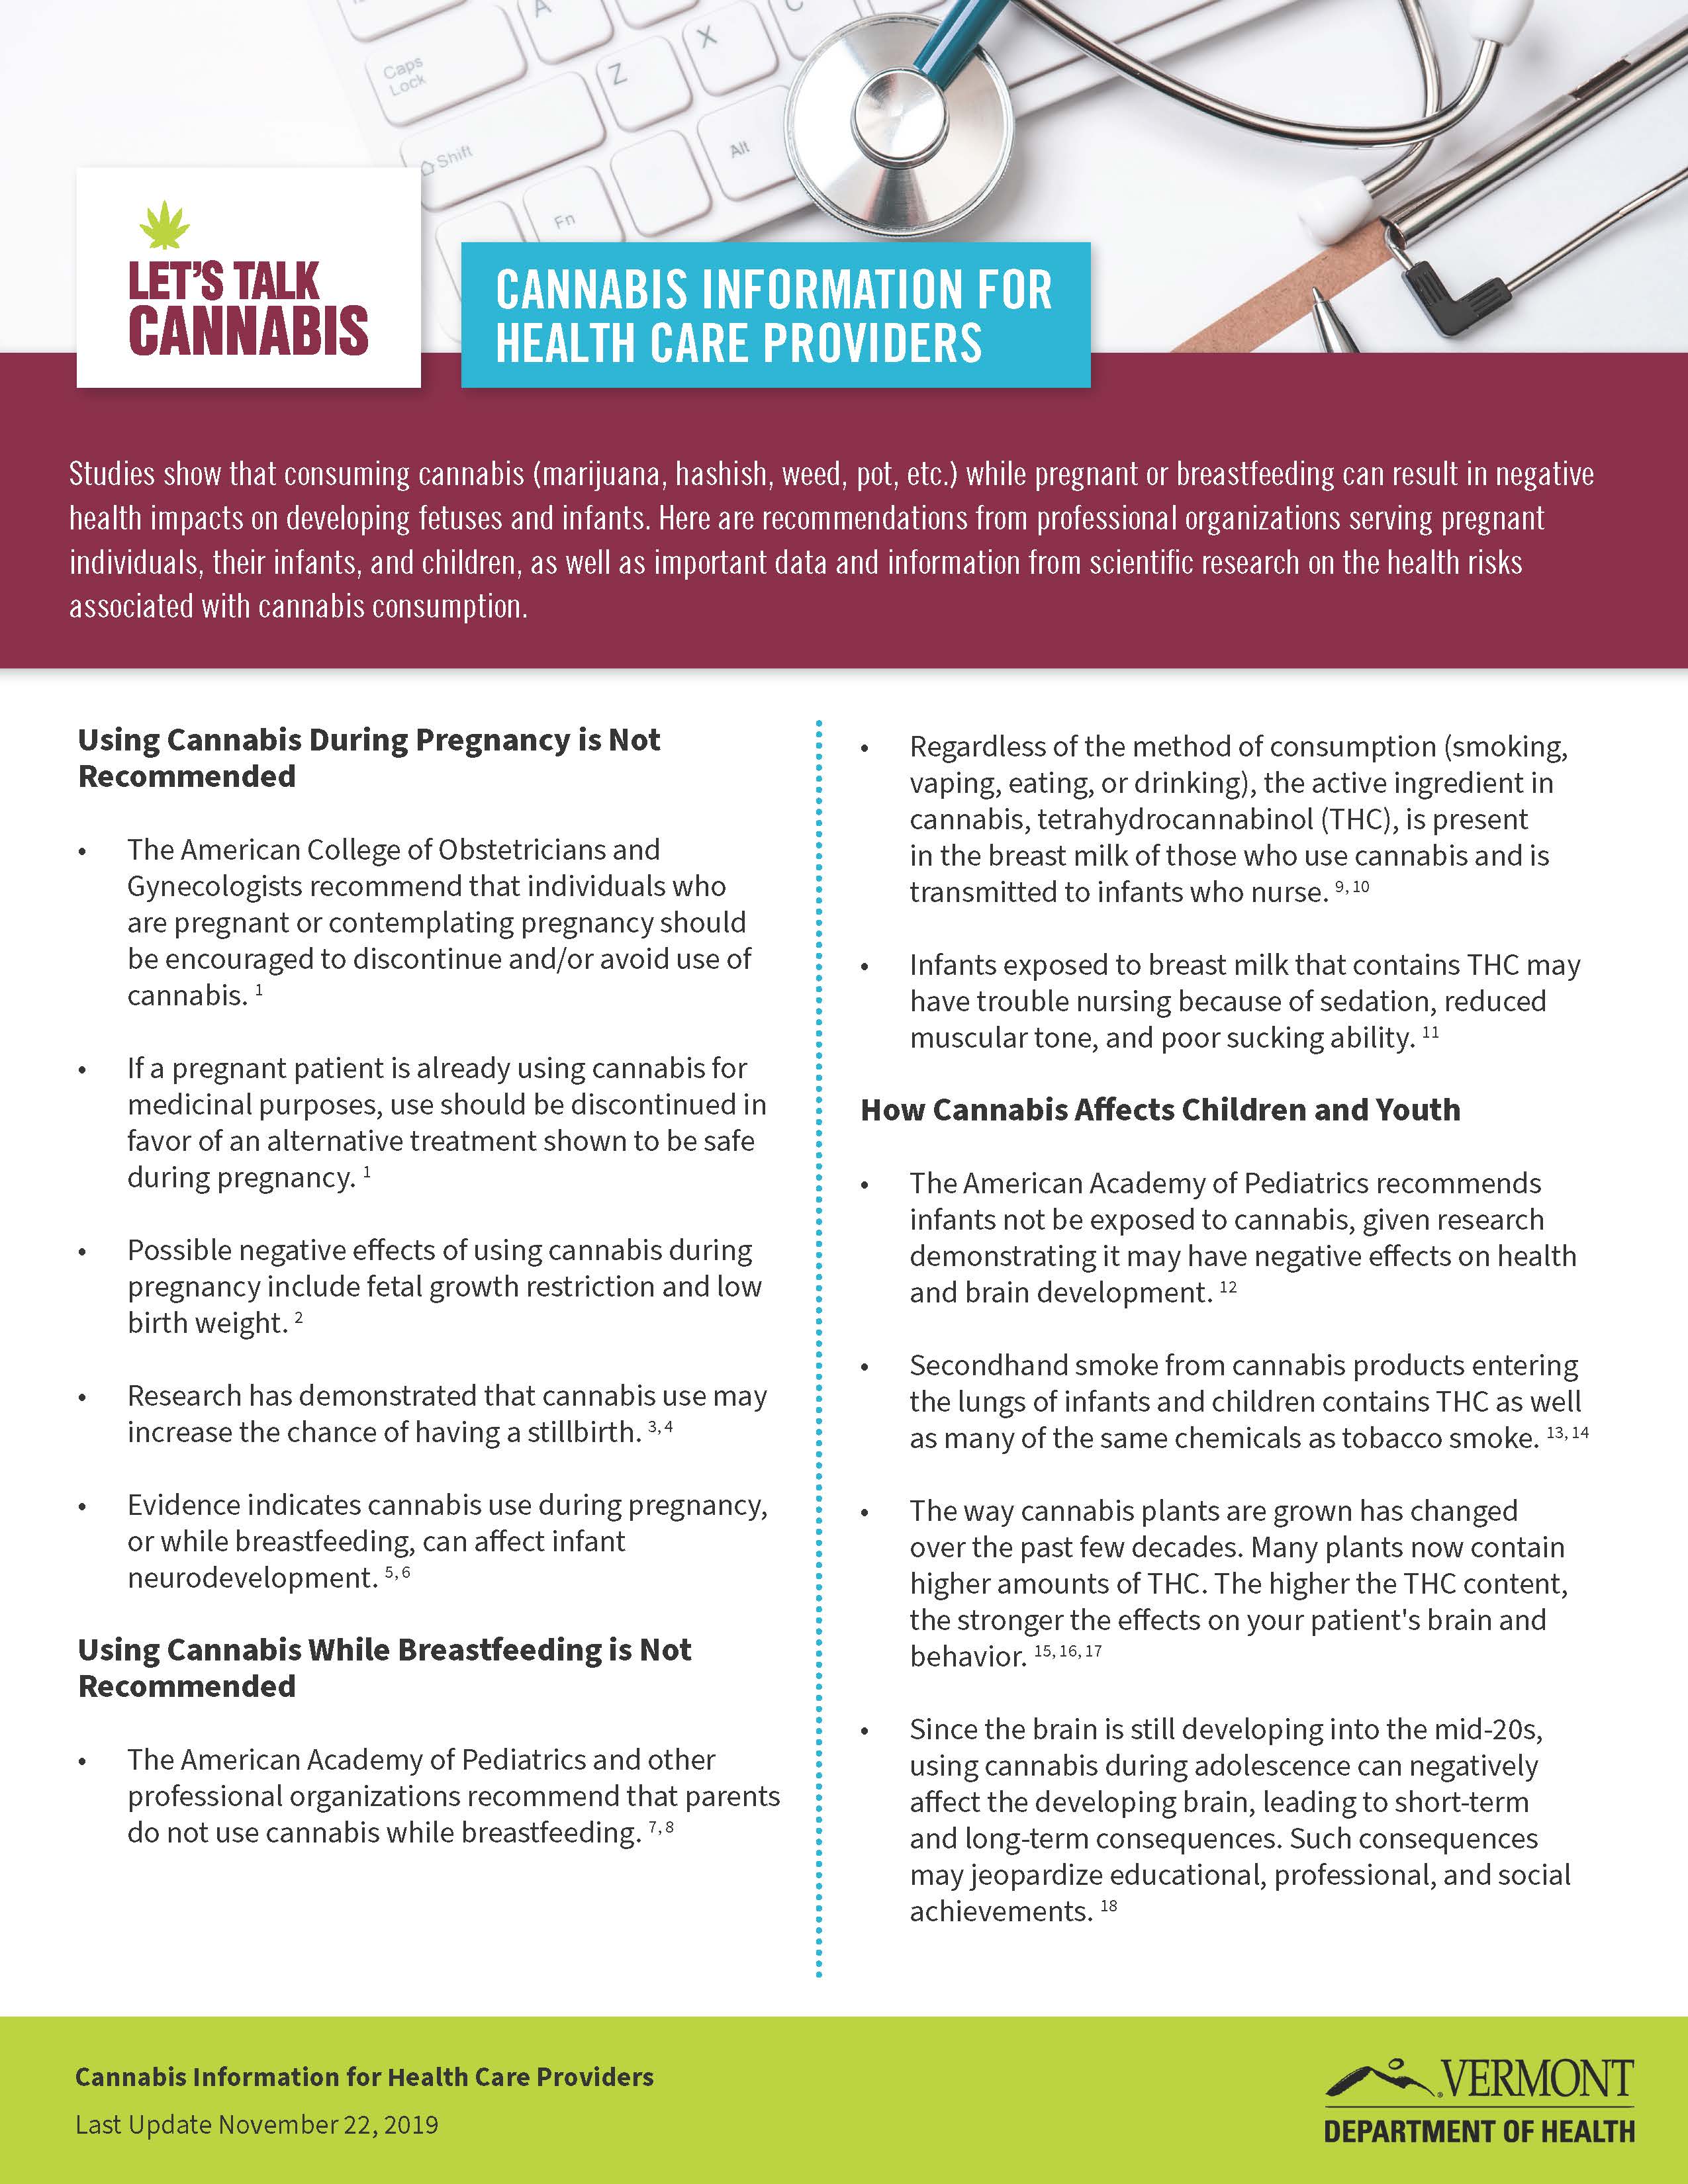 Let's Talk Cannabis health care providers fact sheet